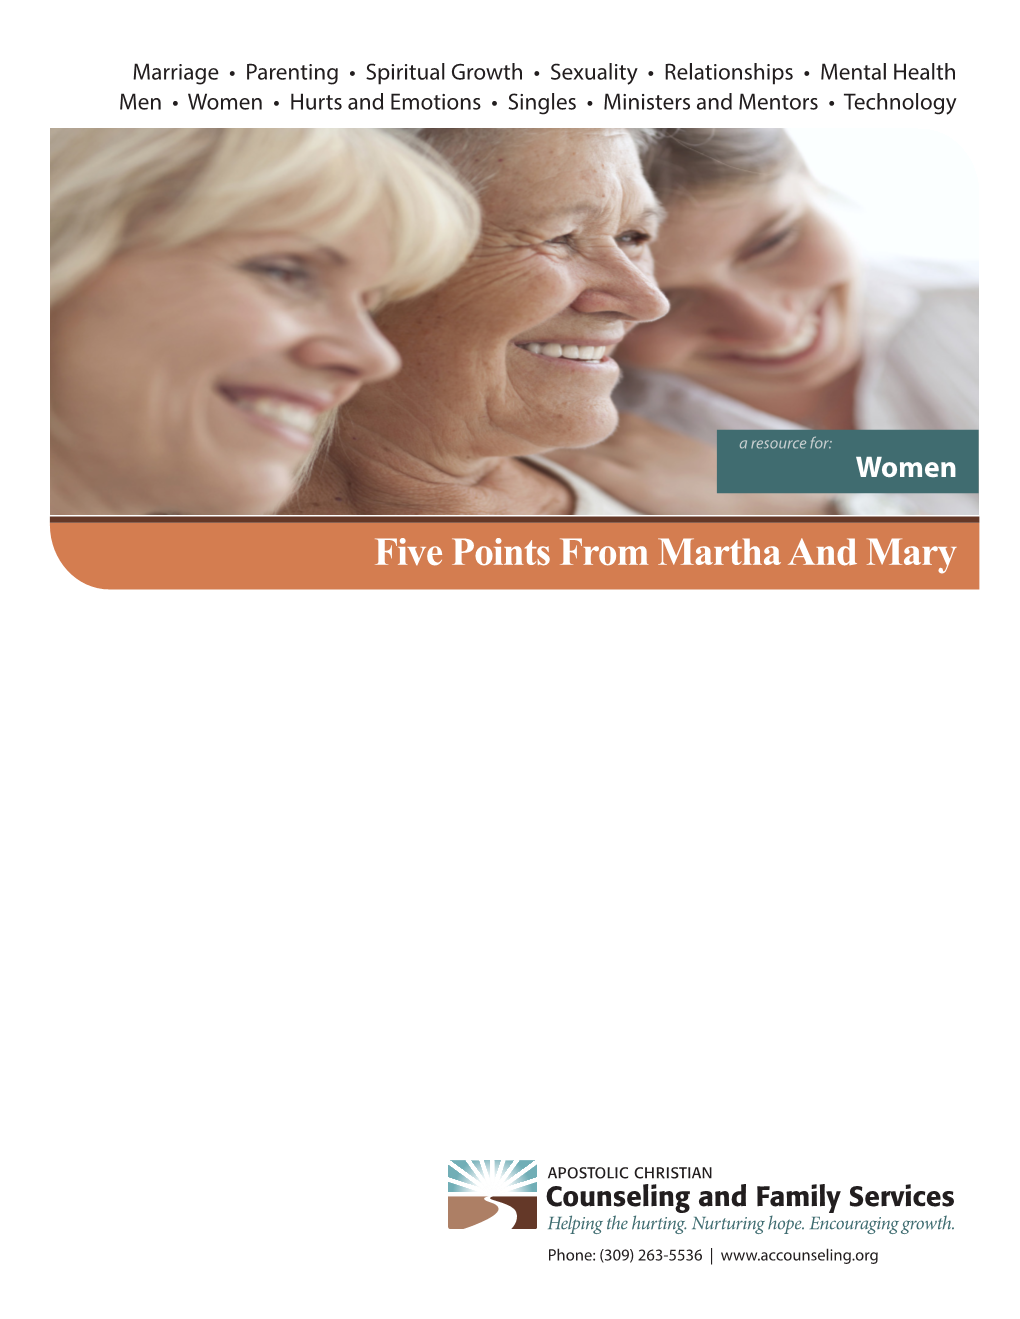 Five Points from Martha and Mary